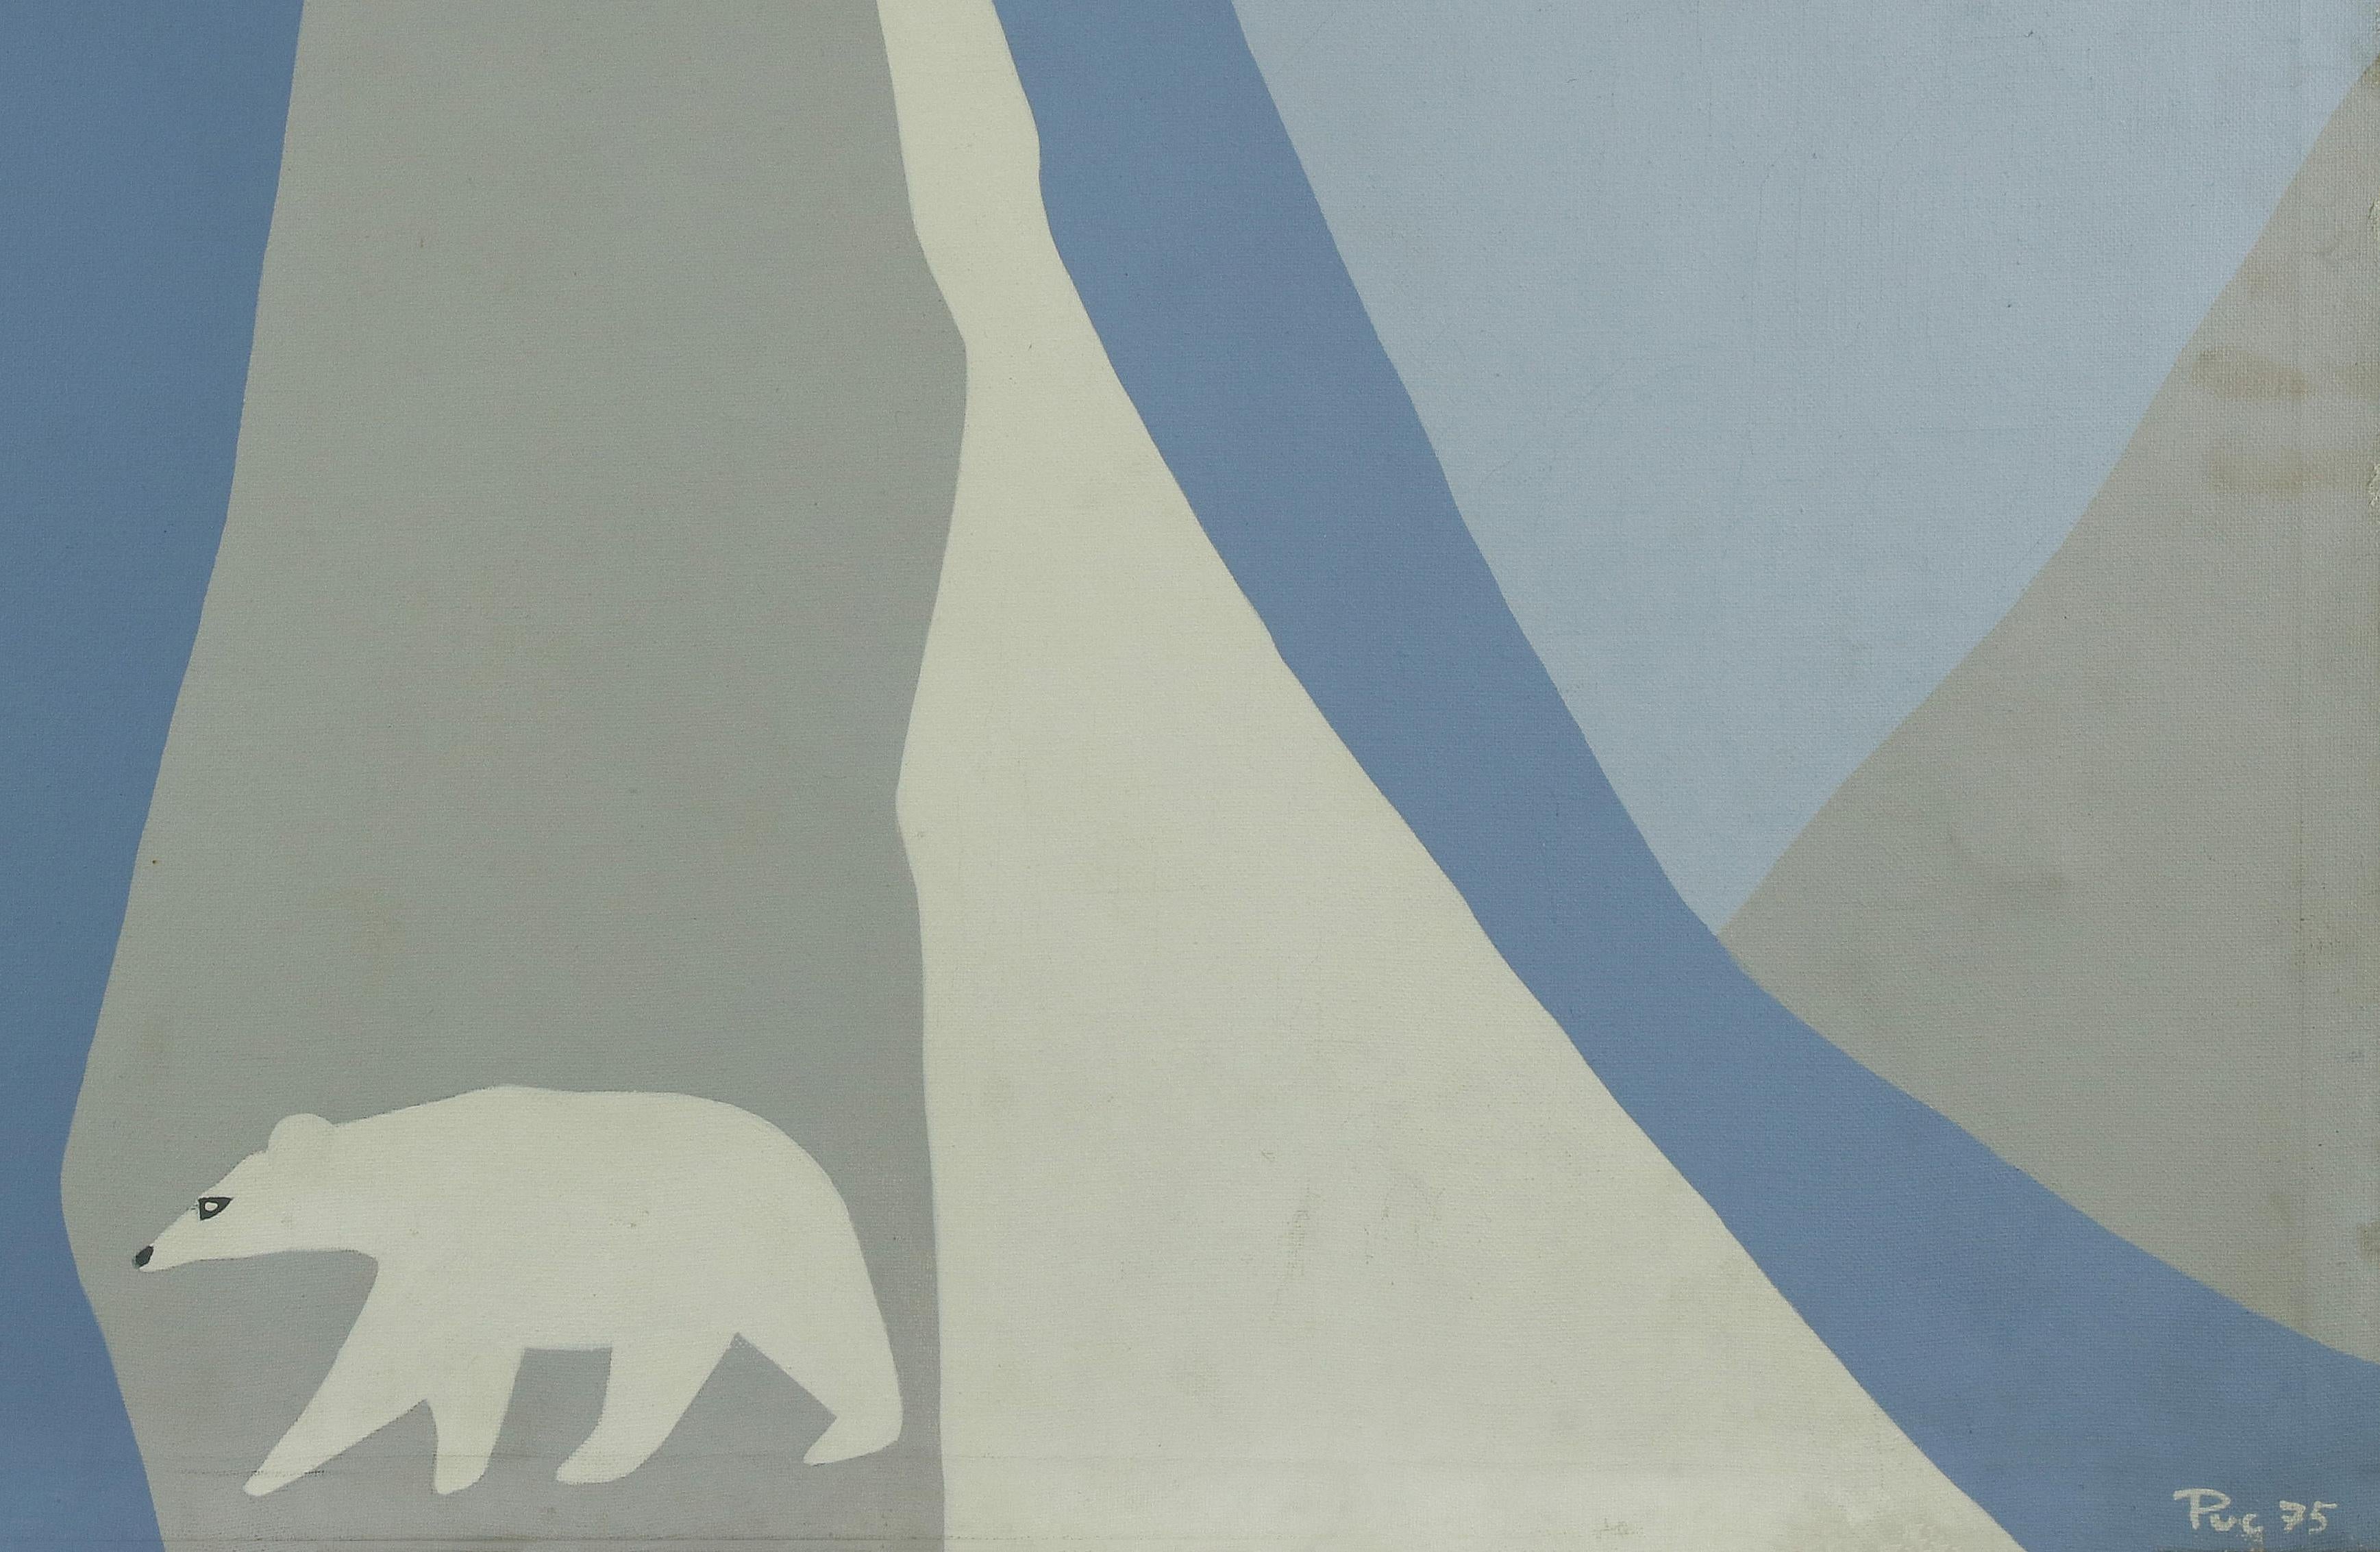 Light Blue and White Surface with Bears - Acrylic on Canvas by G. Puccini - 1975 - Painting by Unknown